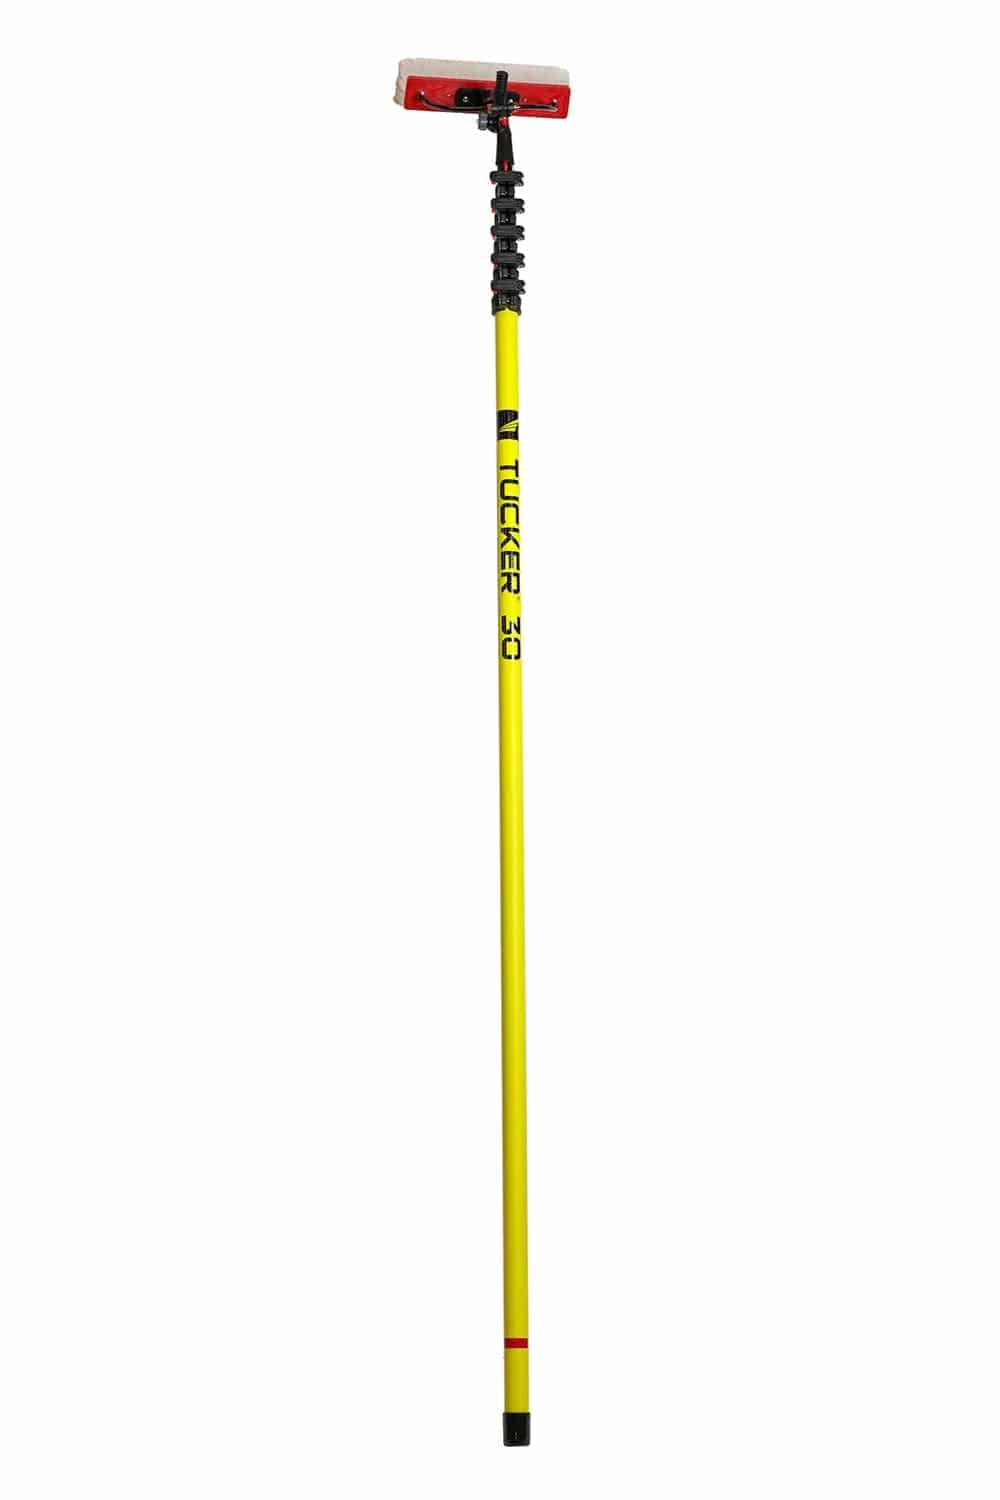 Southeast Softwash RIVAL BY TUCKER® WATER FED POLE SYSTEM - BASIC 4-STAGE KIT